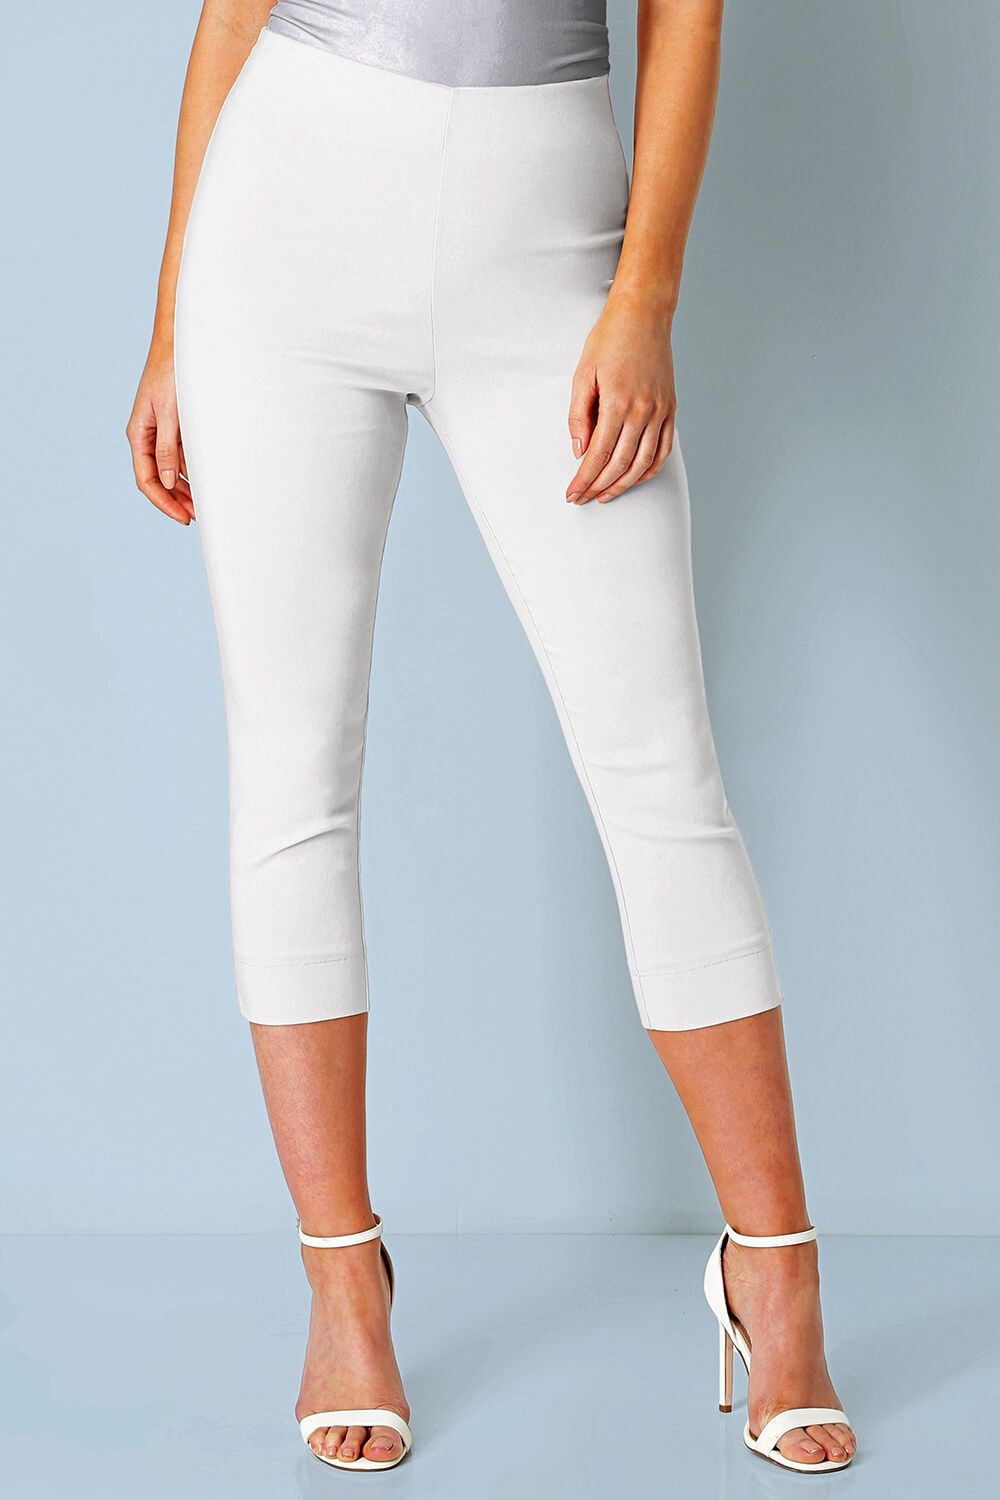 White Capris | Northern Reflections